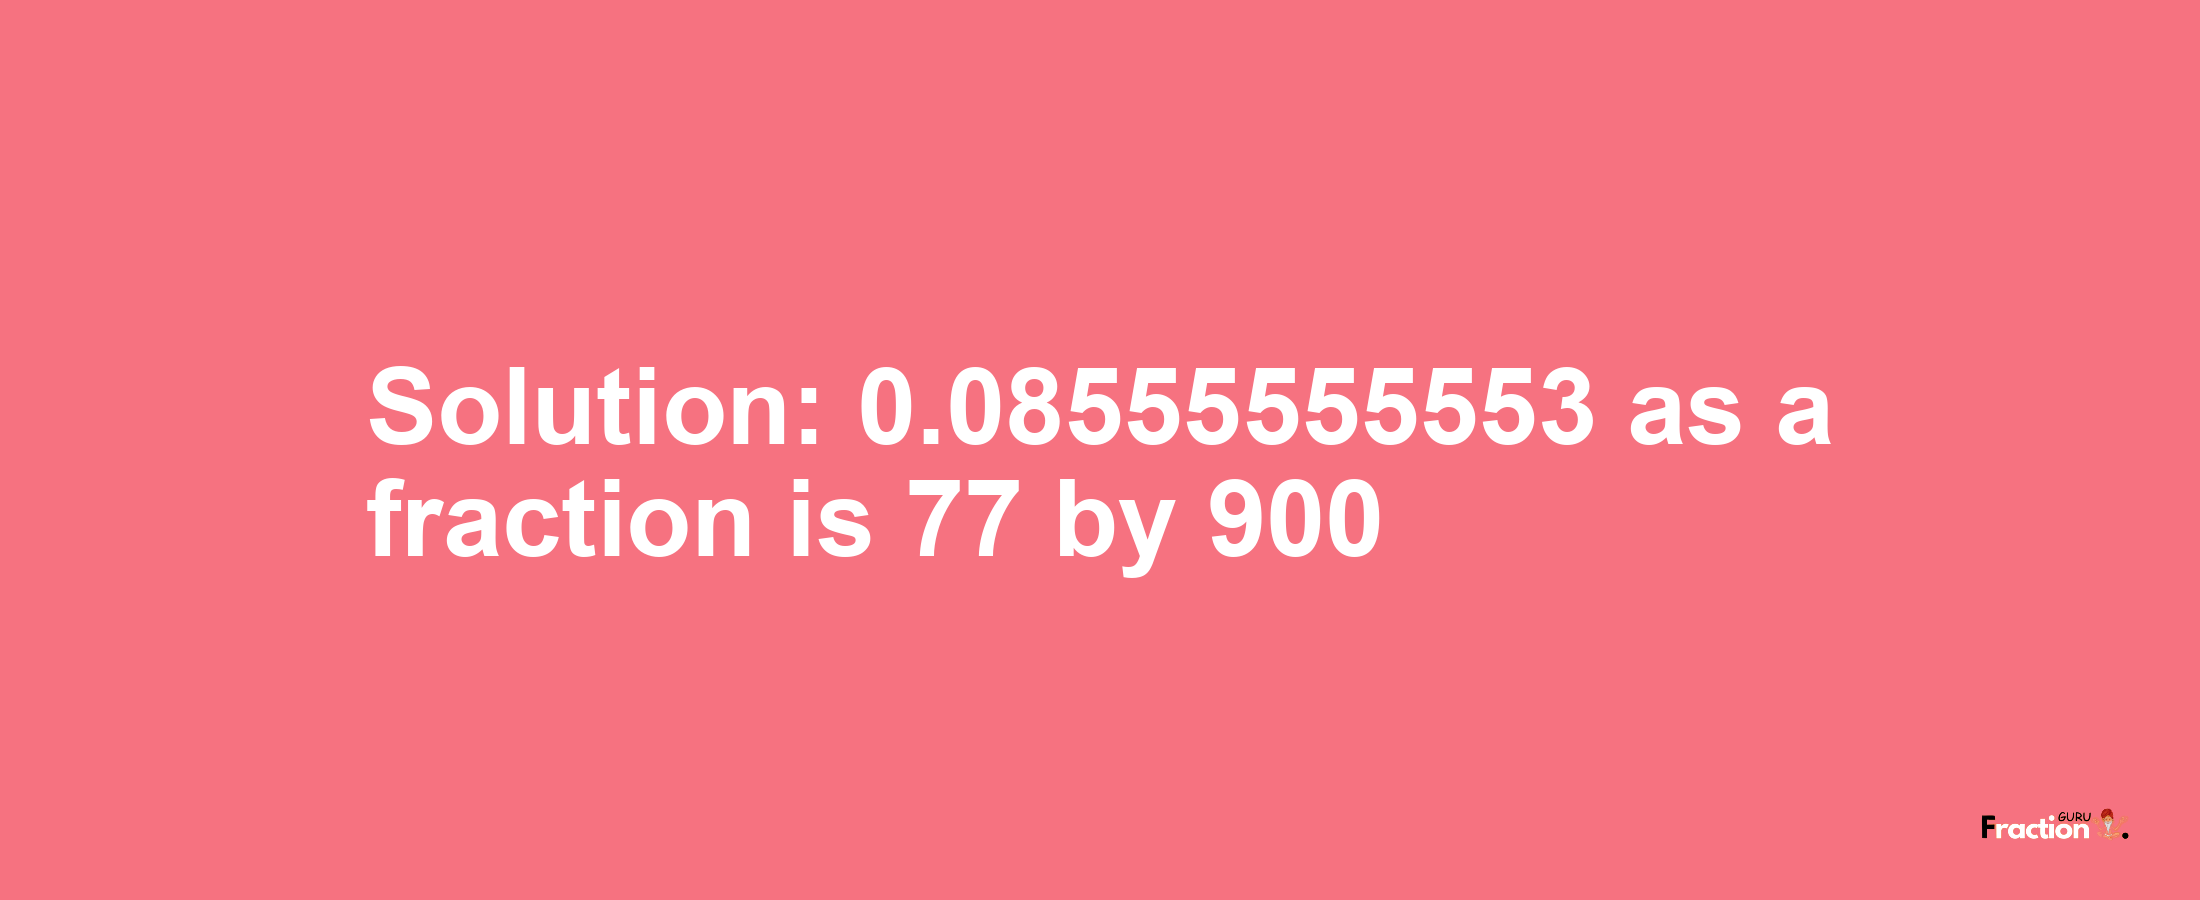 Solution:0.08555555553 as a fraction is 77/900